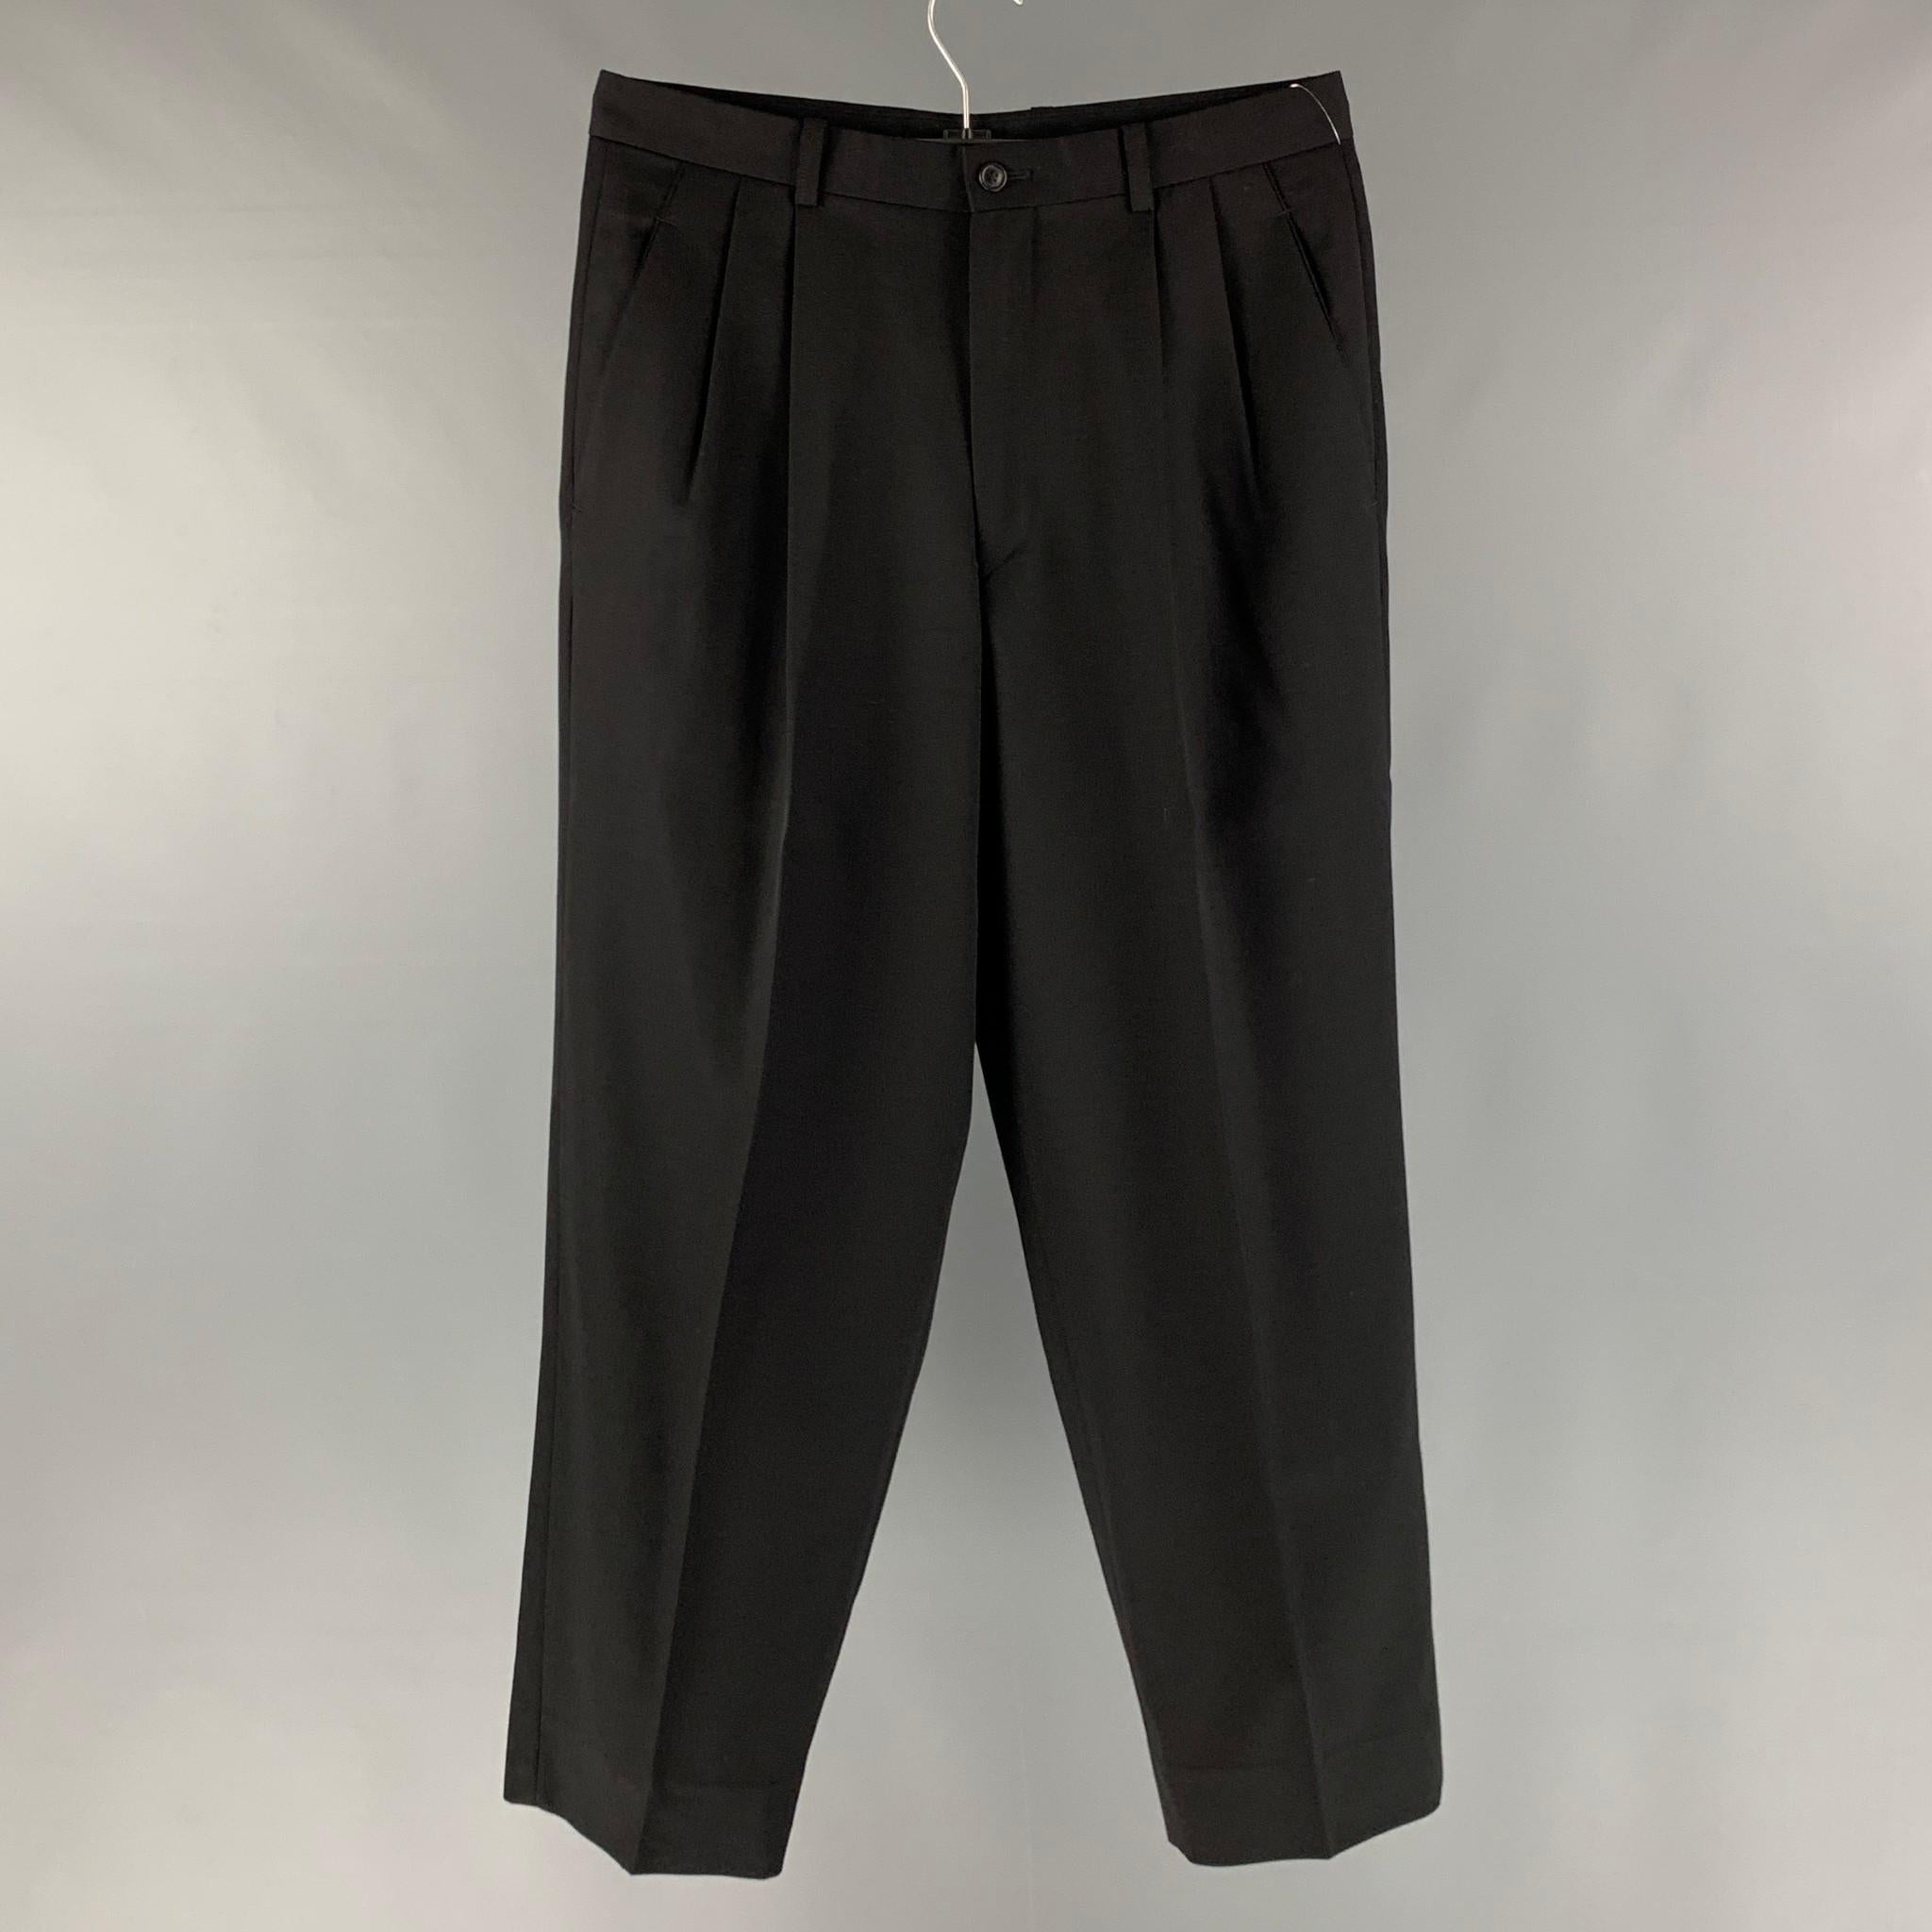 ISSEY MIYAKE dress pants comes in a black wool featuring a pleated style, and a zip fly closure. Made in Japan.

Excellent Pre-Owned Condition.
Marked: S

Measurements:

Waist: 32 in.
Rise: 12 in.
Inseam: 29 in.
Leg Opening: 18 in. 

SKU: